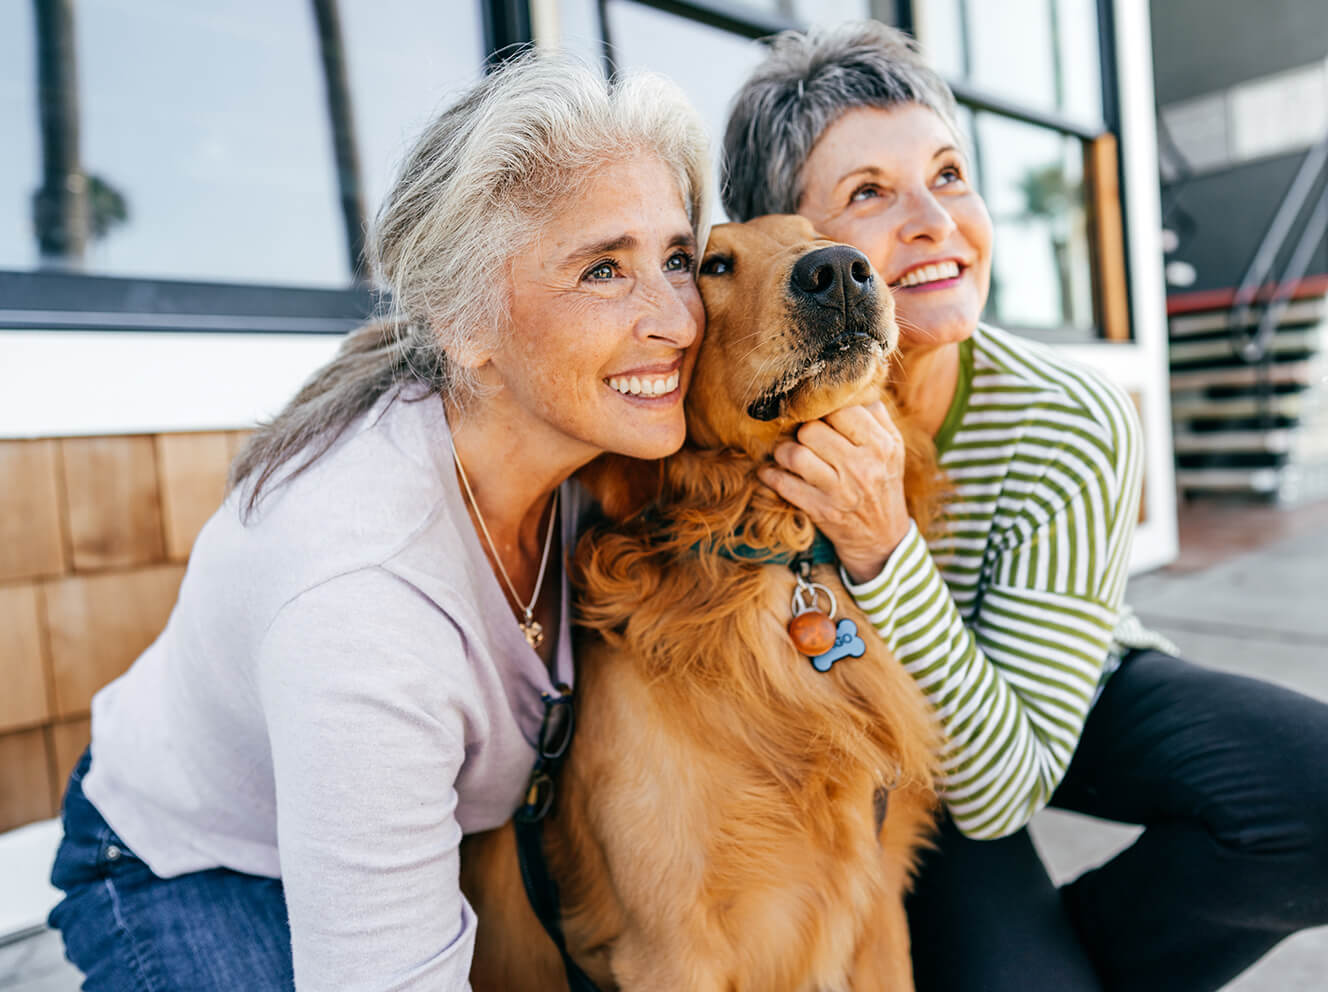 Two women looking towards the sky with a golden retriever sitting between them.